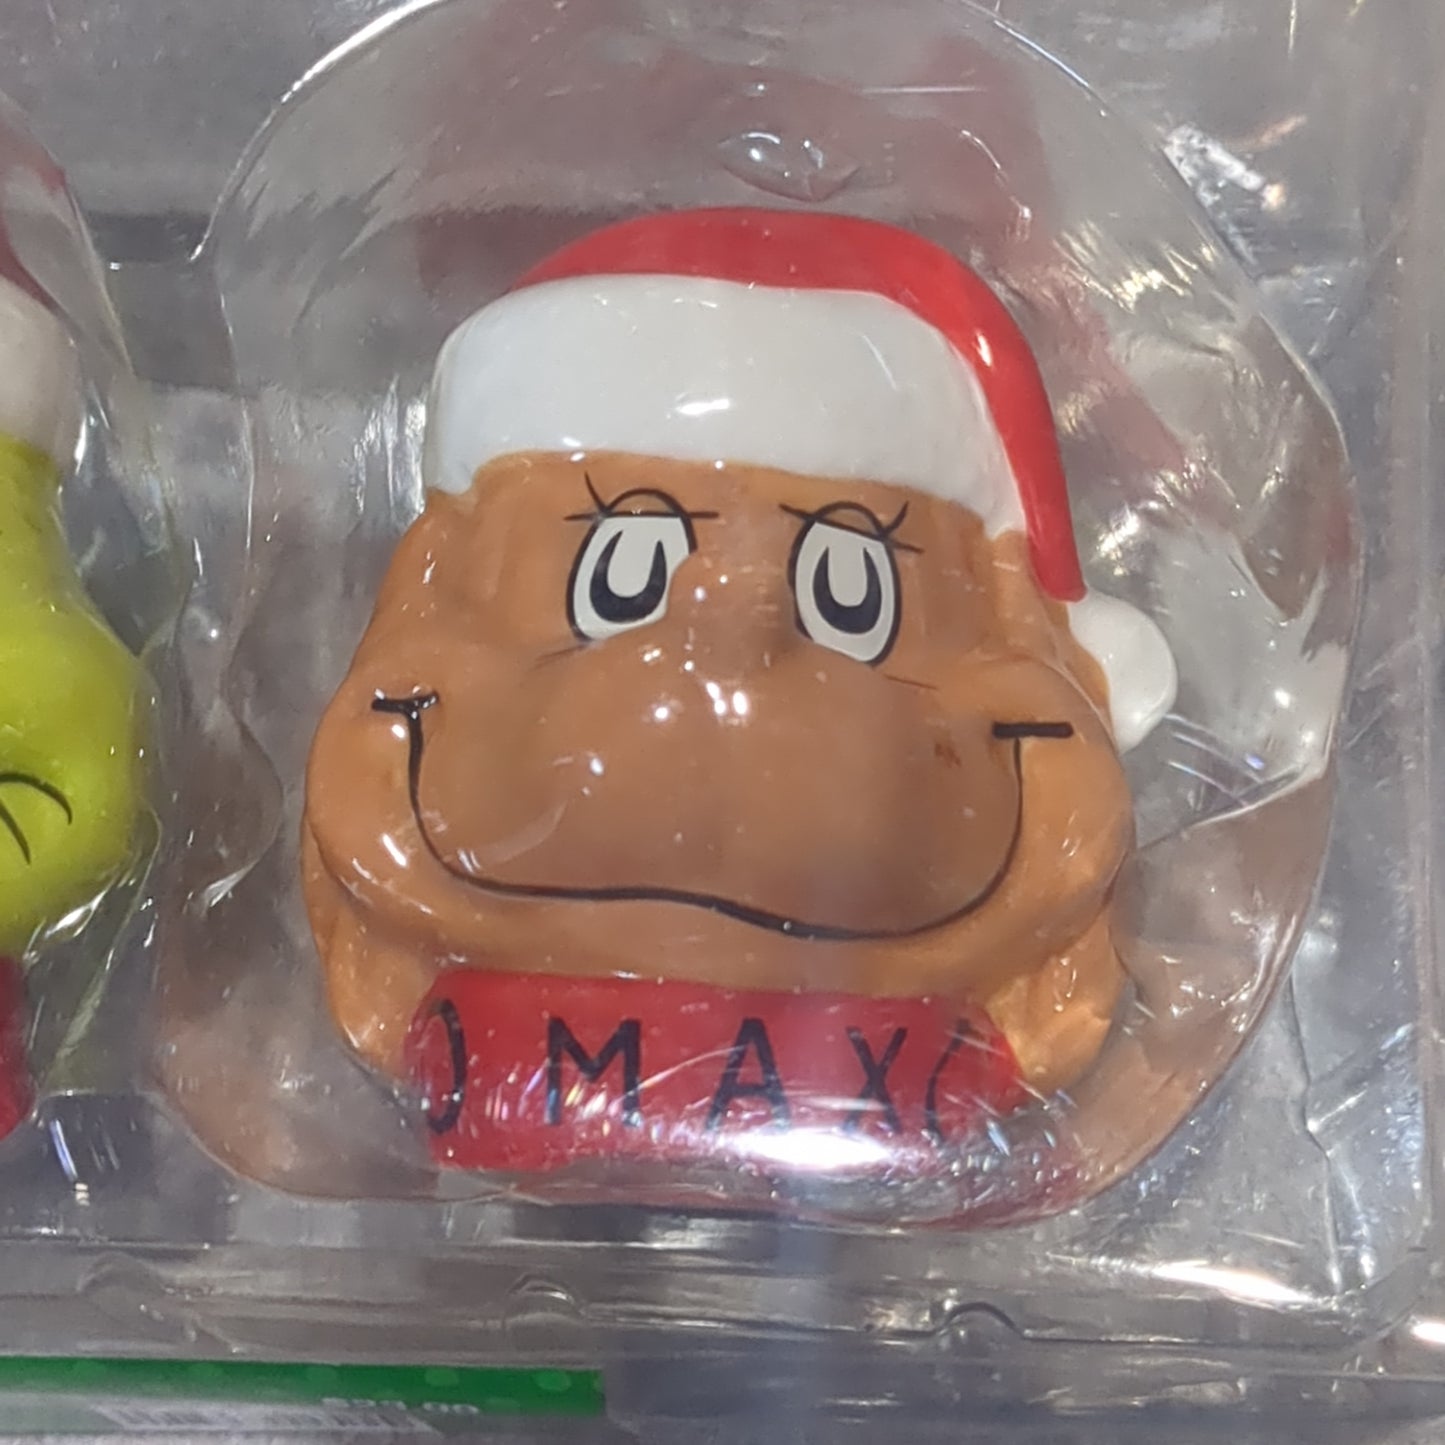 Grinch and Max salt and pepper shaker set